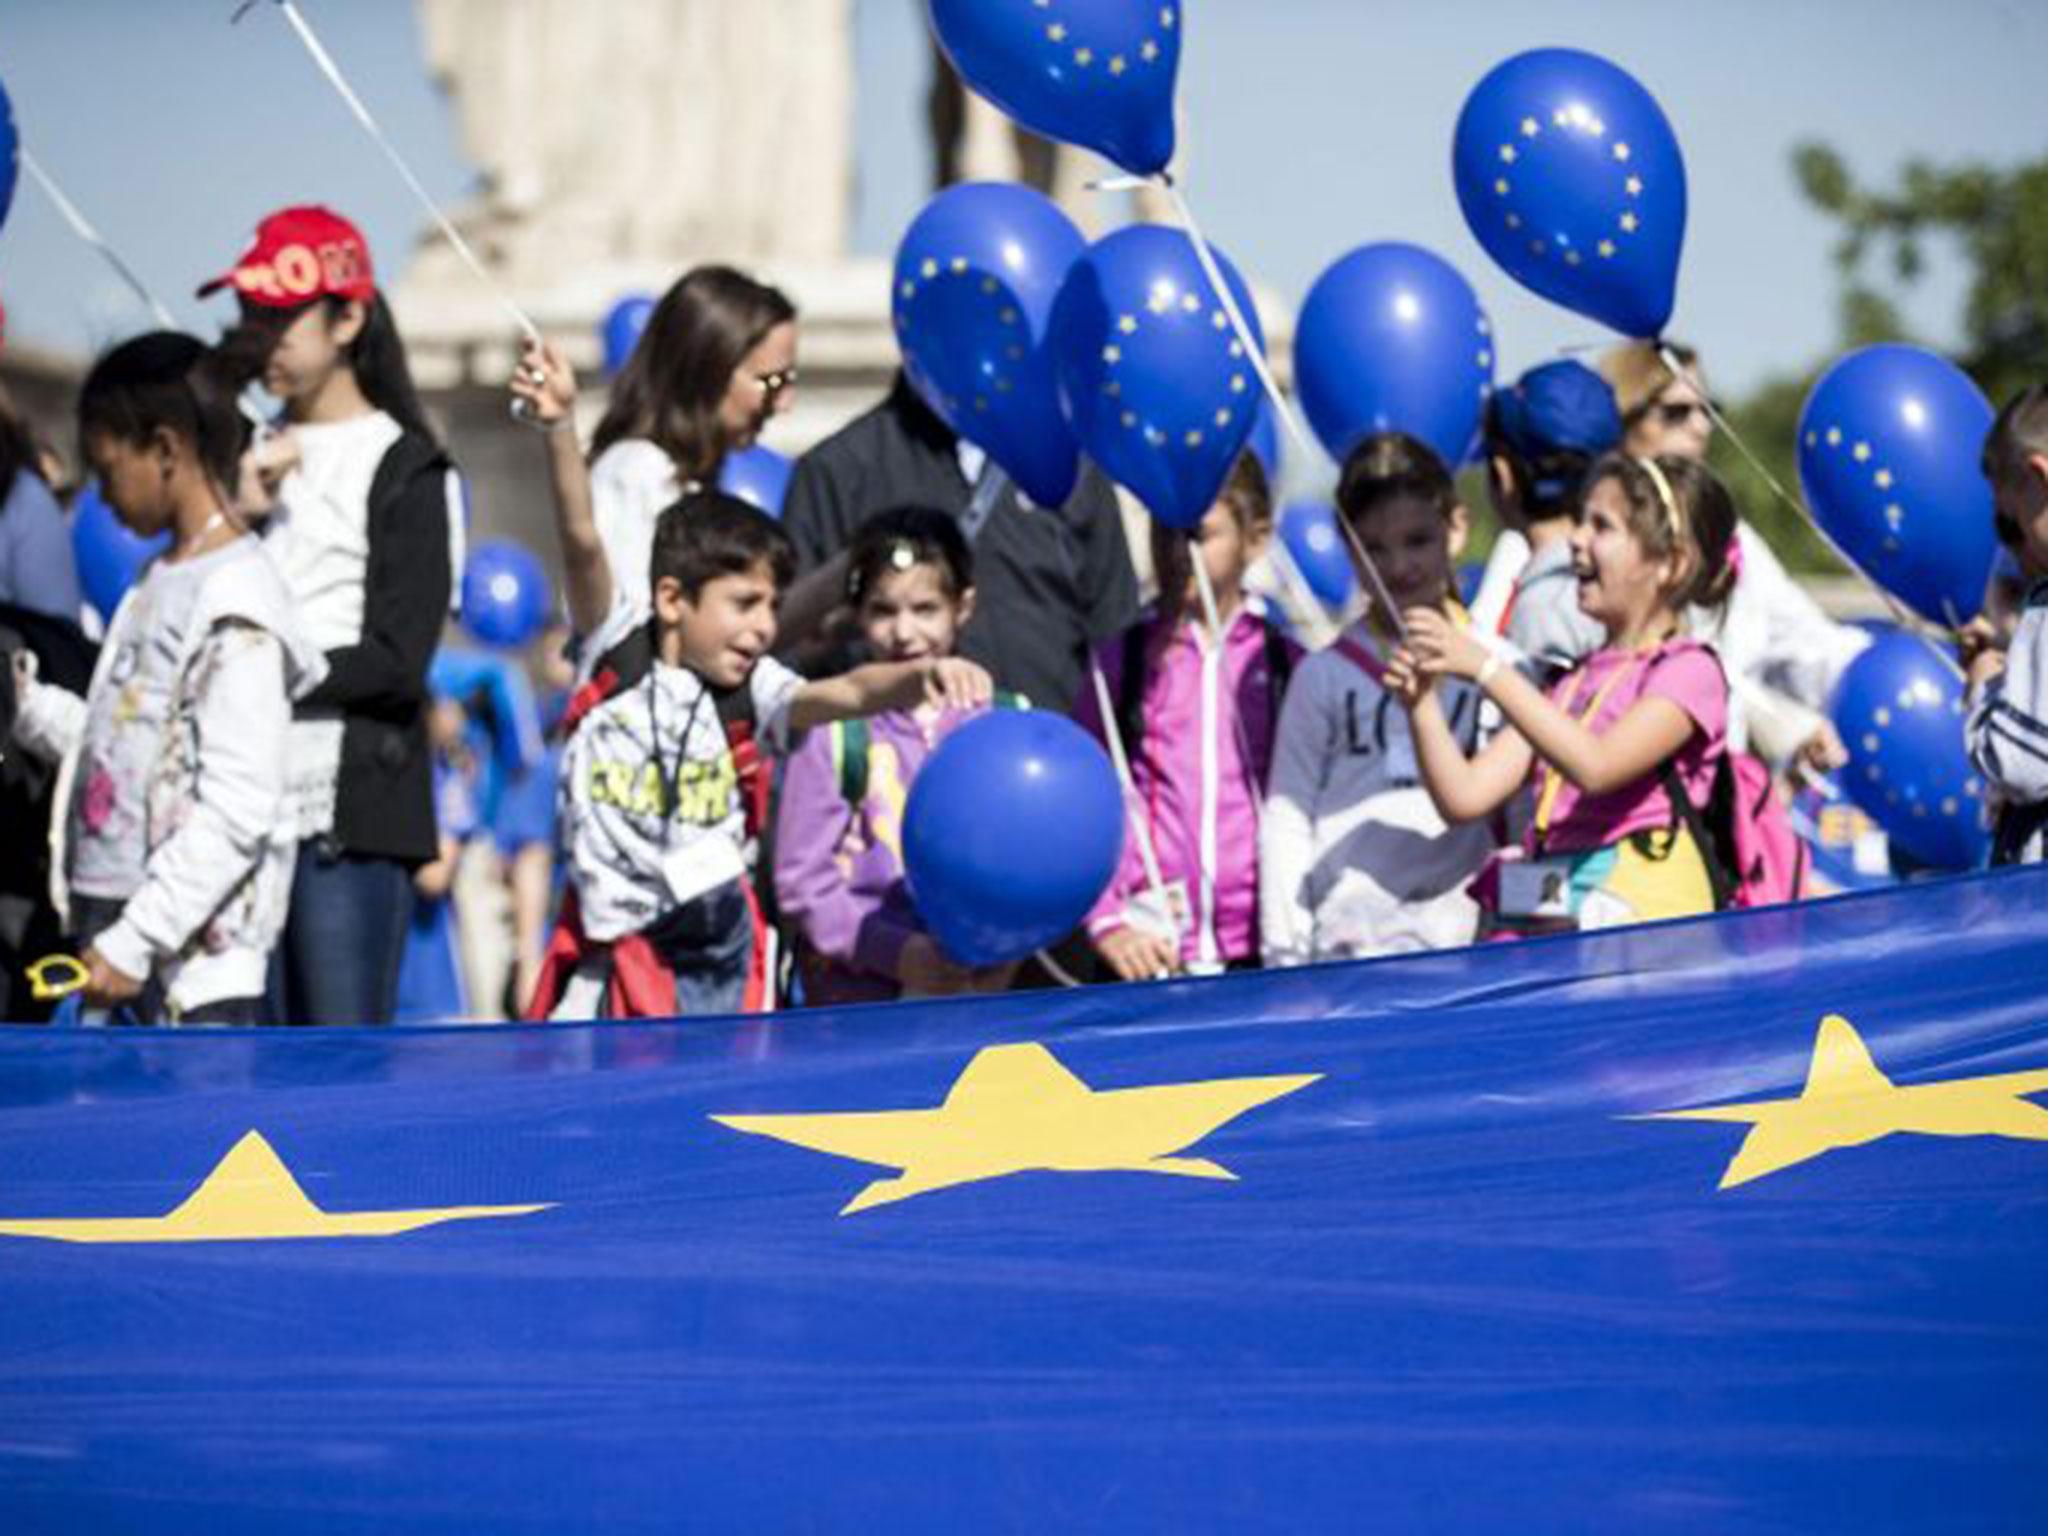 Europeans celebrate 'Europe Day', which marks the anniversary of the 'Schuman declaration' of political cooperation